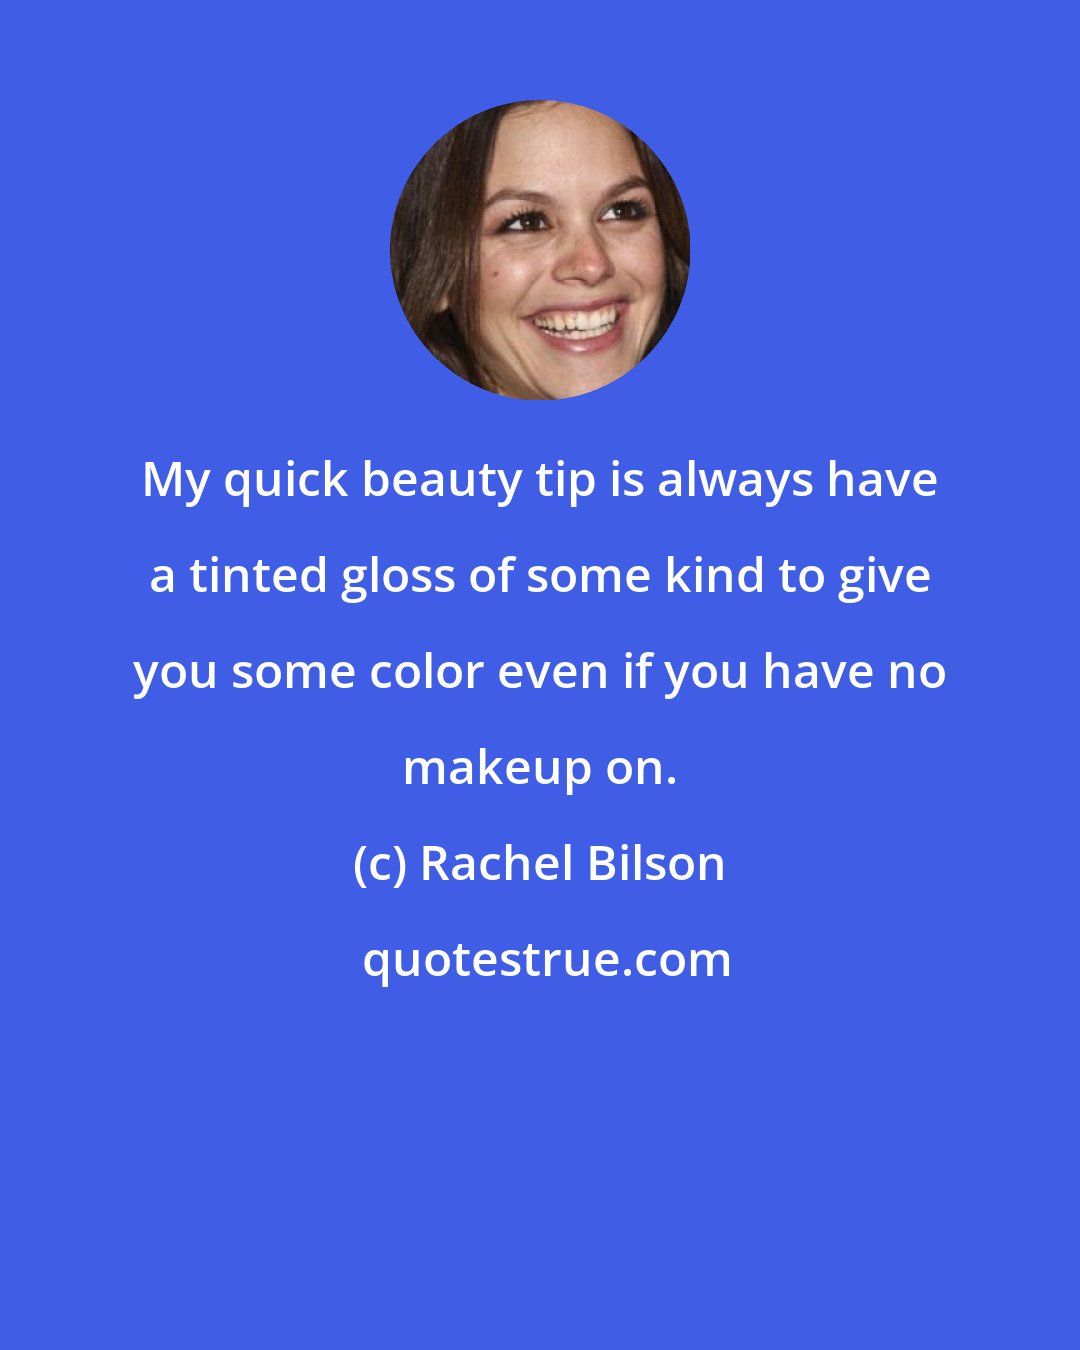 Rachel Bilson: My quick beauty tip is always have a tinted gloss of some kind to give you some color even if you have no makeup on.